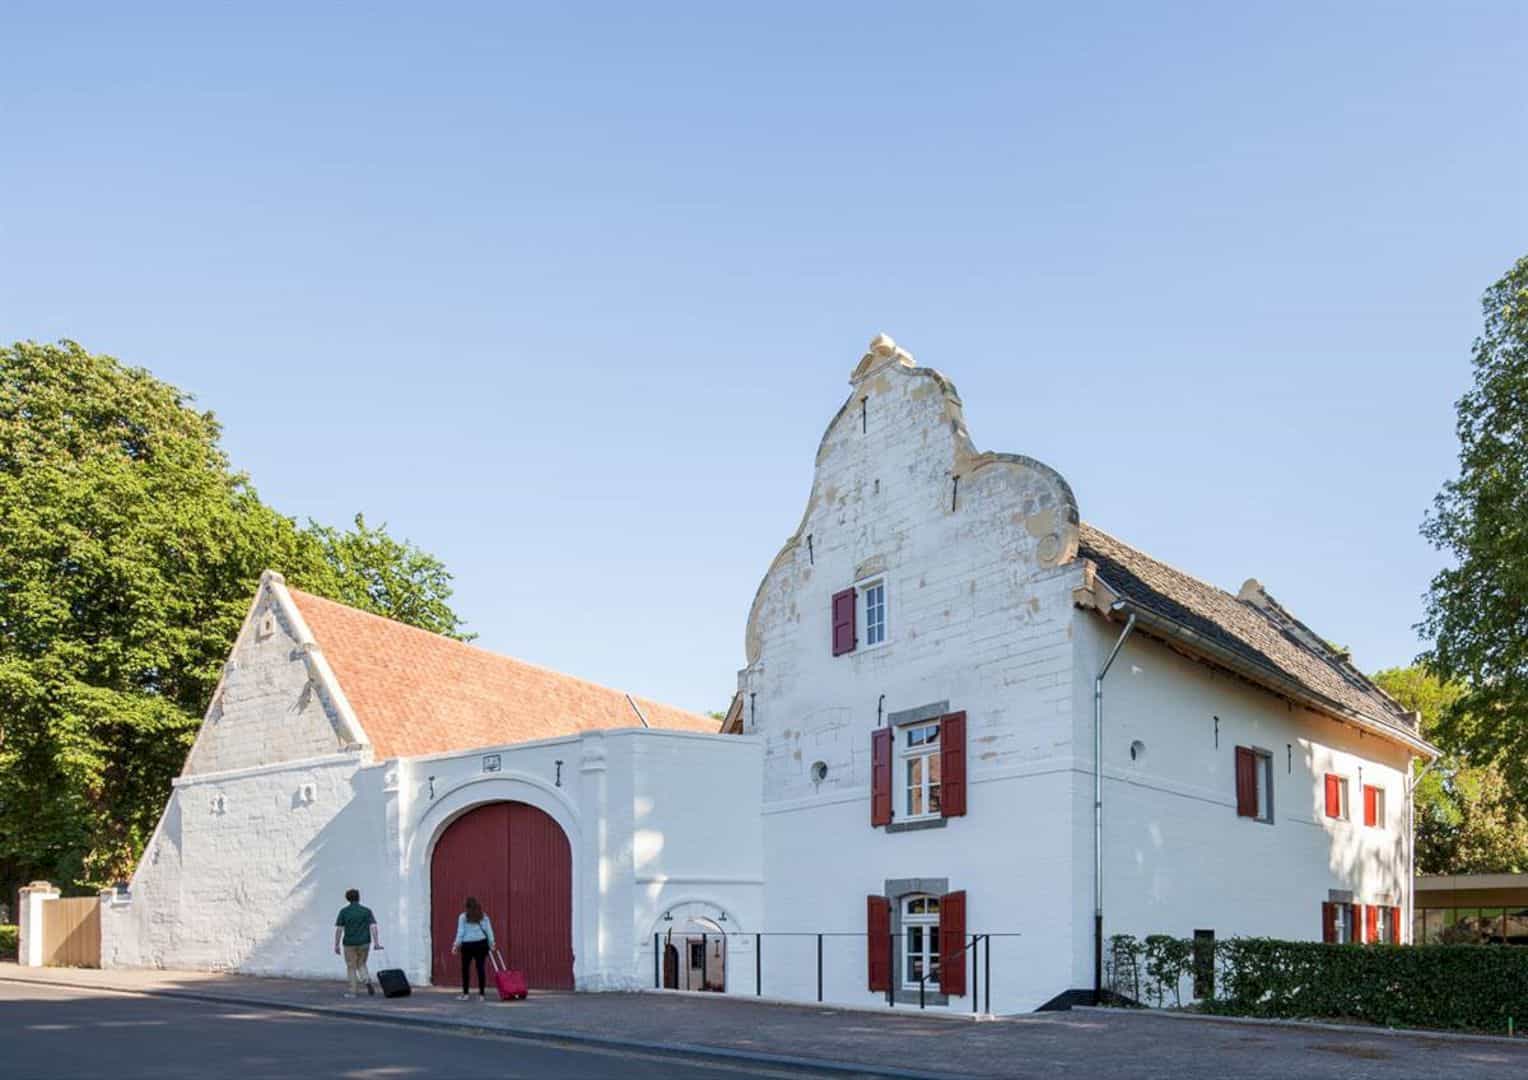 St Gerlach Pavilion Manor Farm An Elegant Pavilion To Complement Historic Buildings In Hilly Limburg Countryside 9